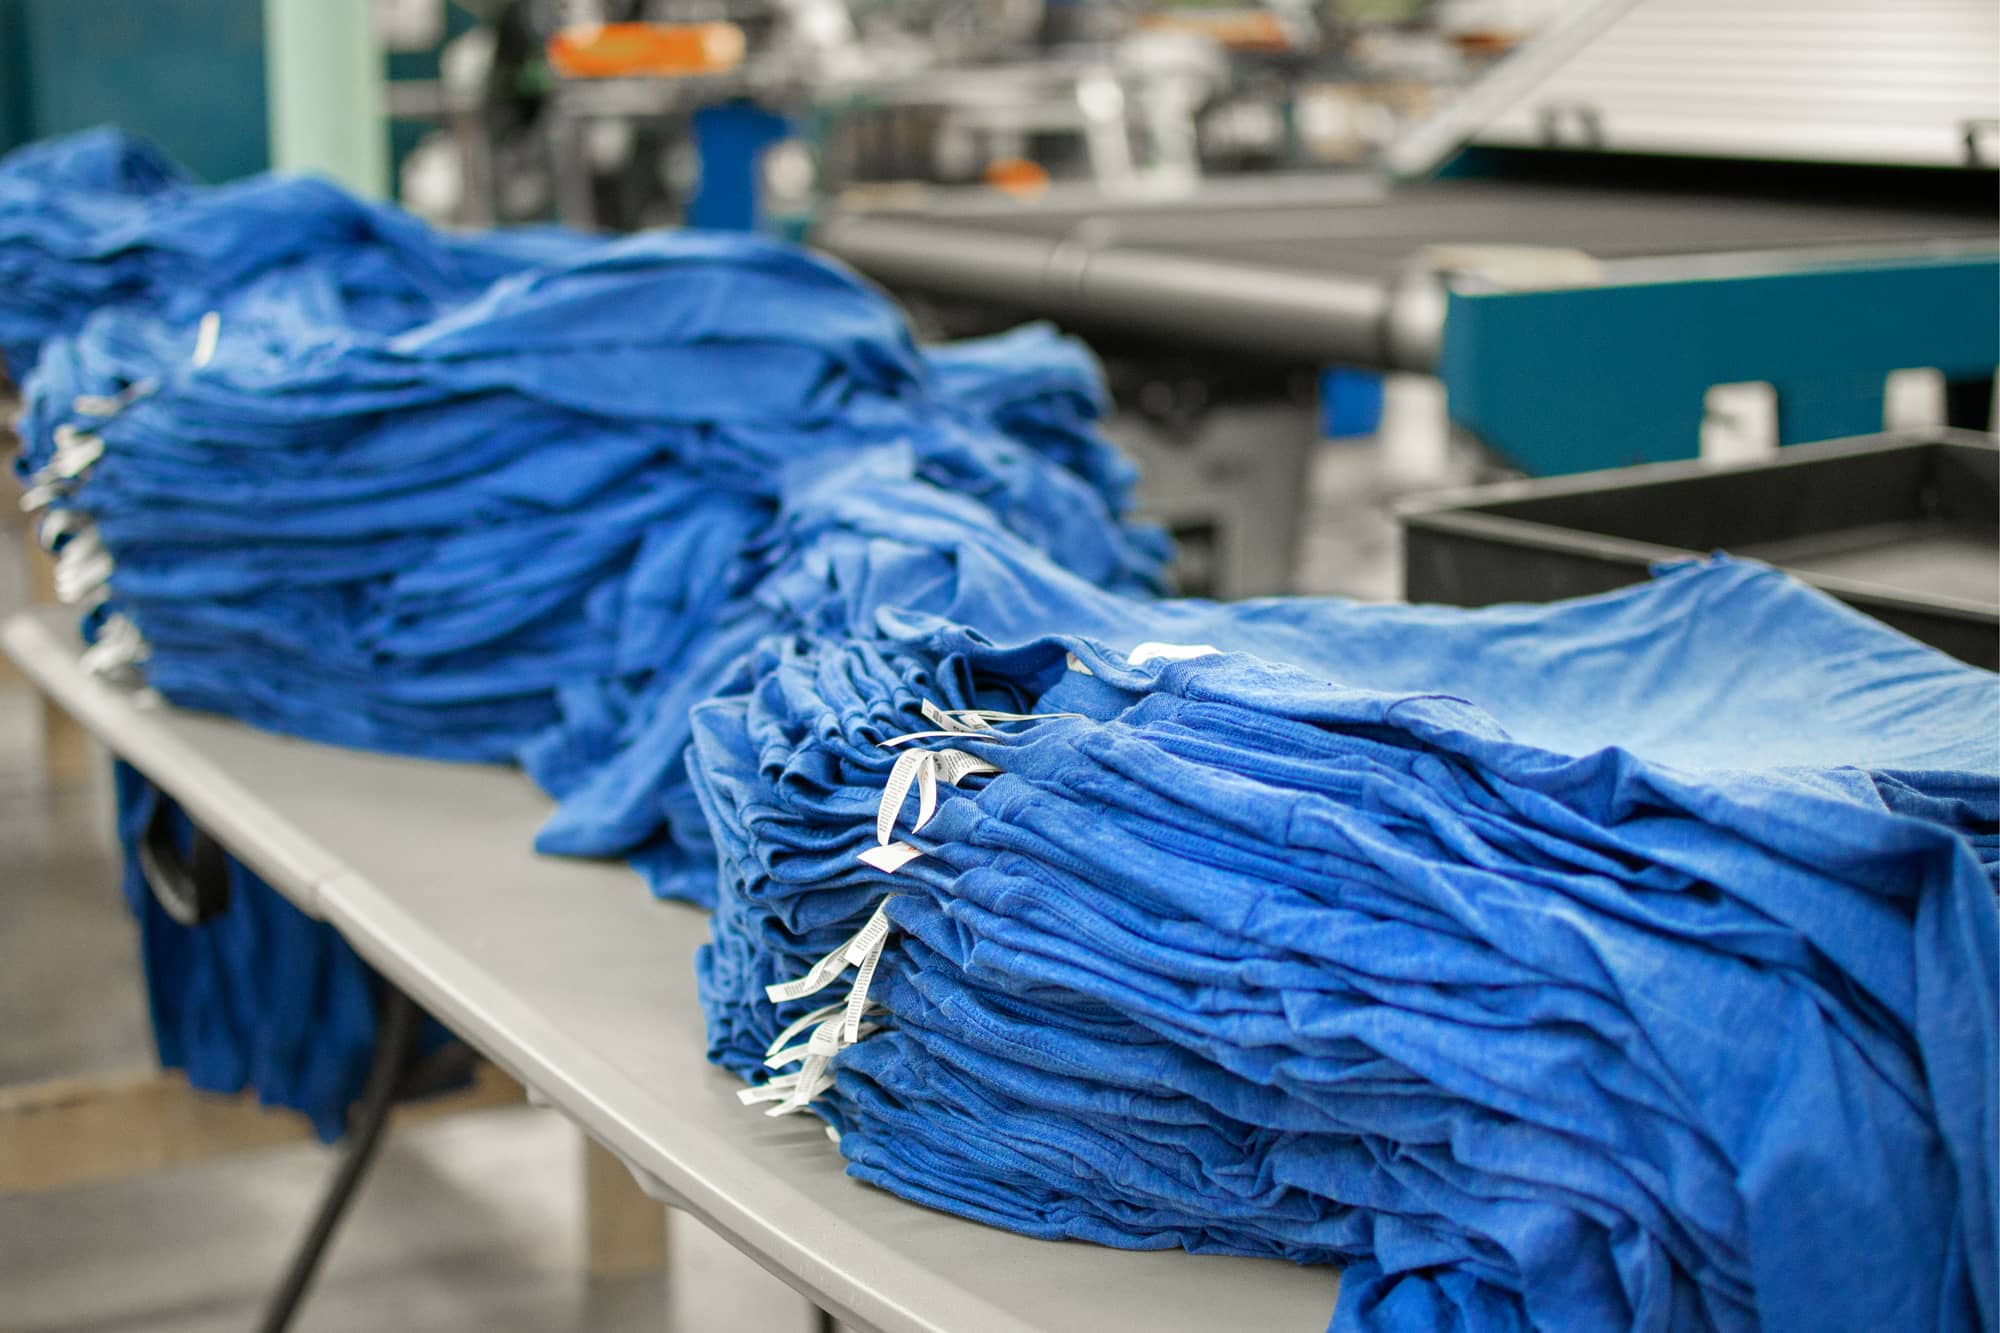 An image showing a stack of t-shirts ready to be screen printed for a bulk order.